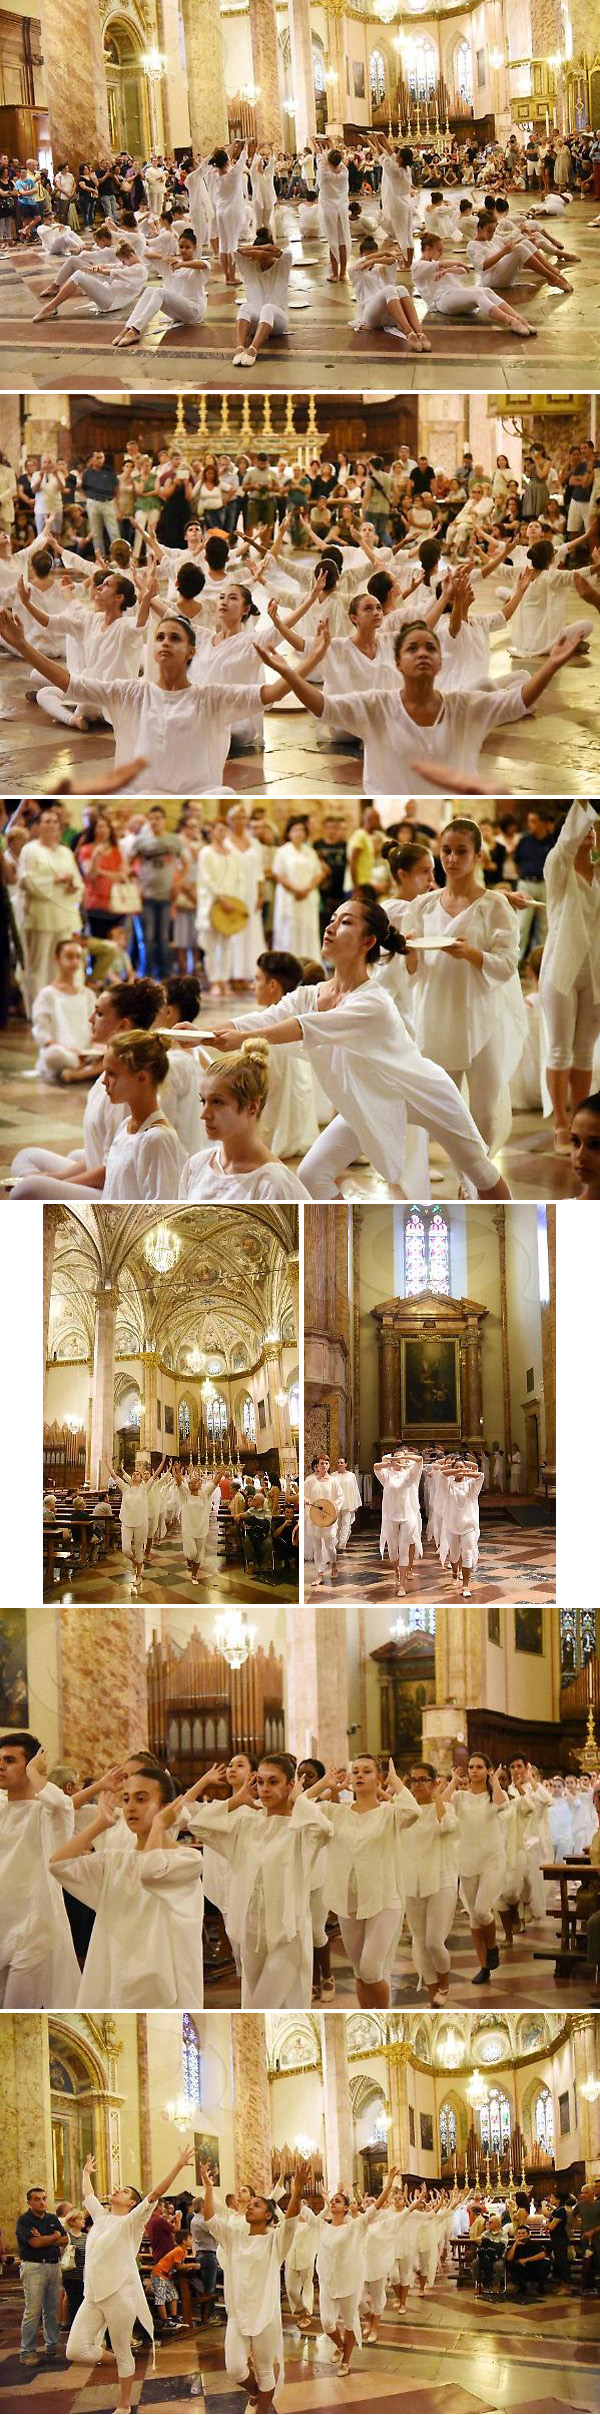 Dance in the Cathedral of Prugia 2